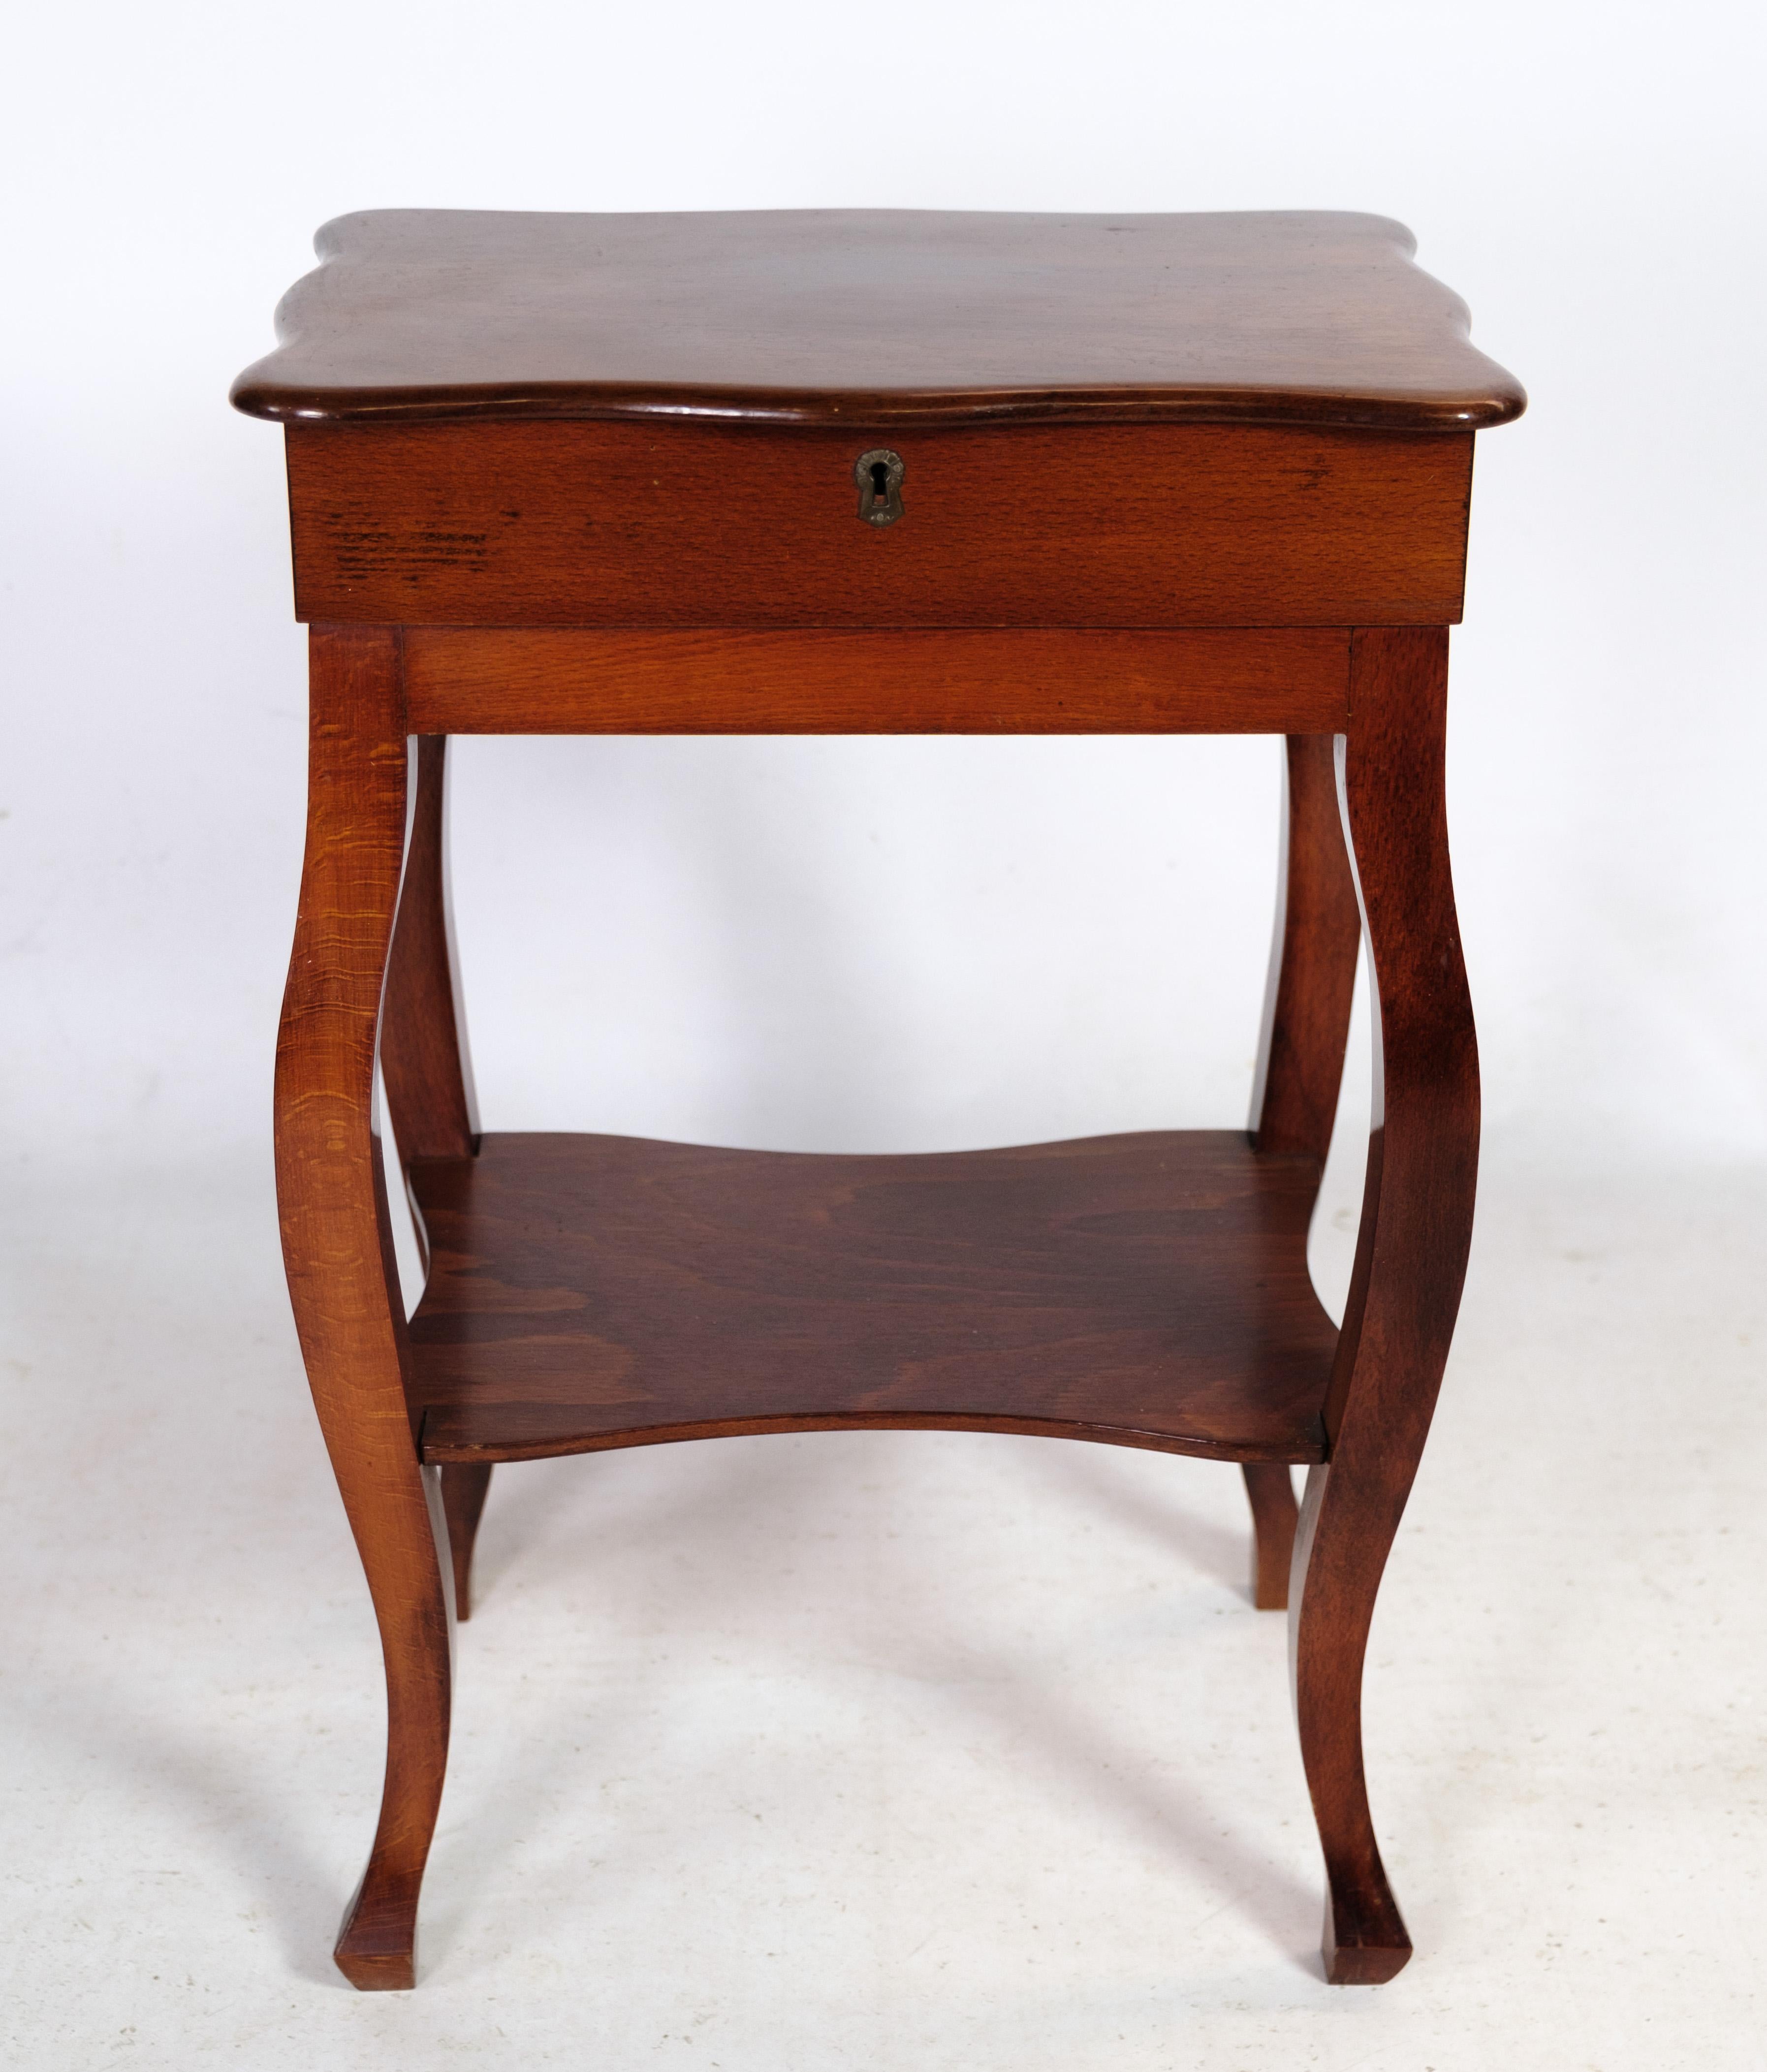 Antique Side Table with a Shelf in Mahogany from Around the 1880 For Sale 2